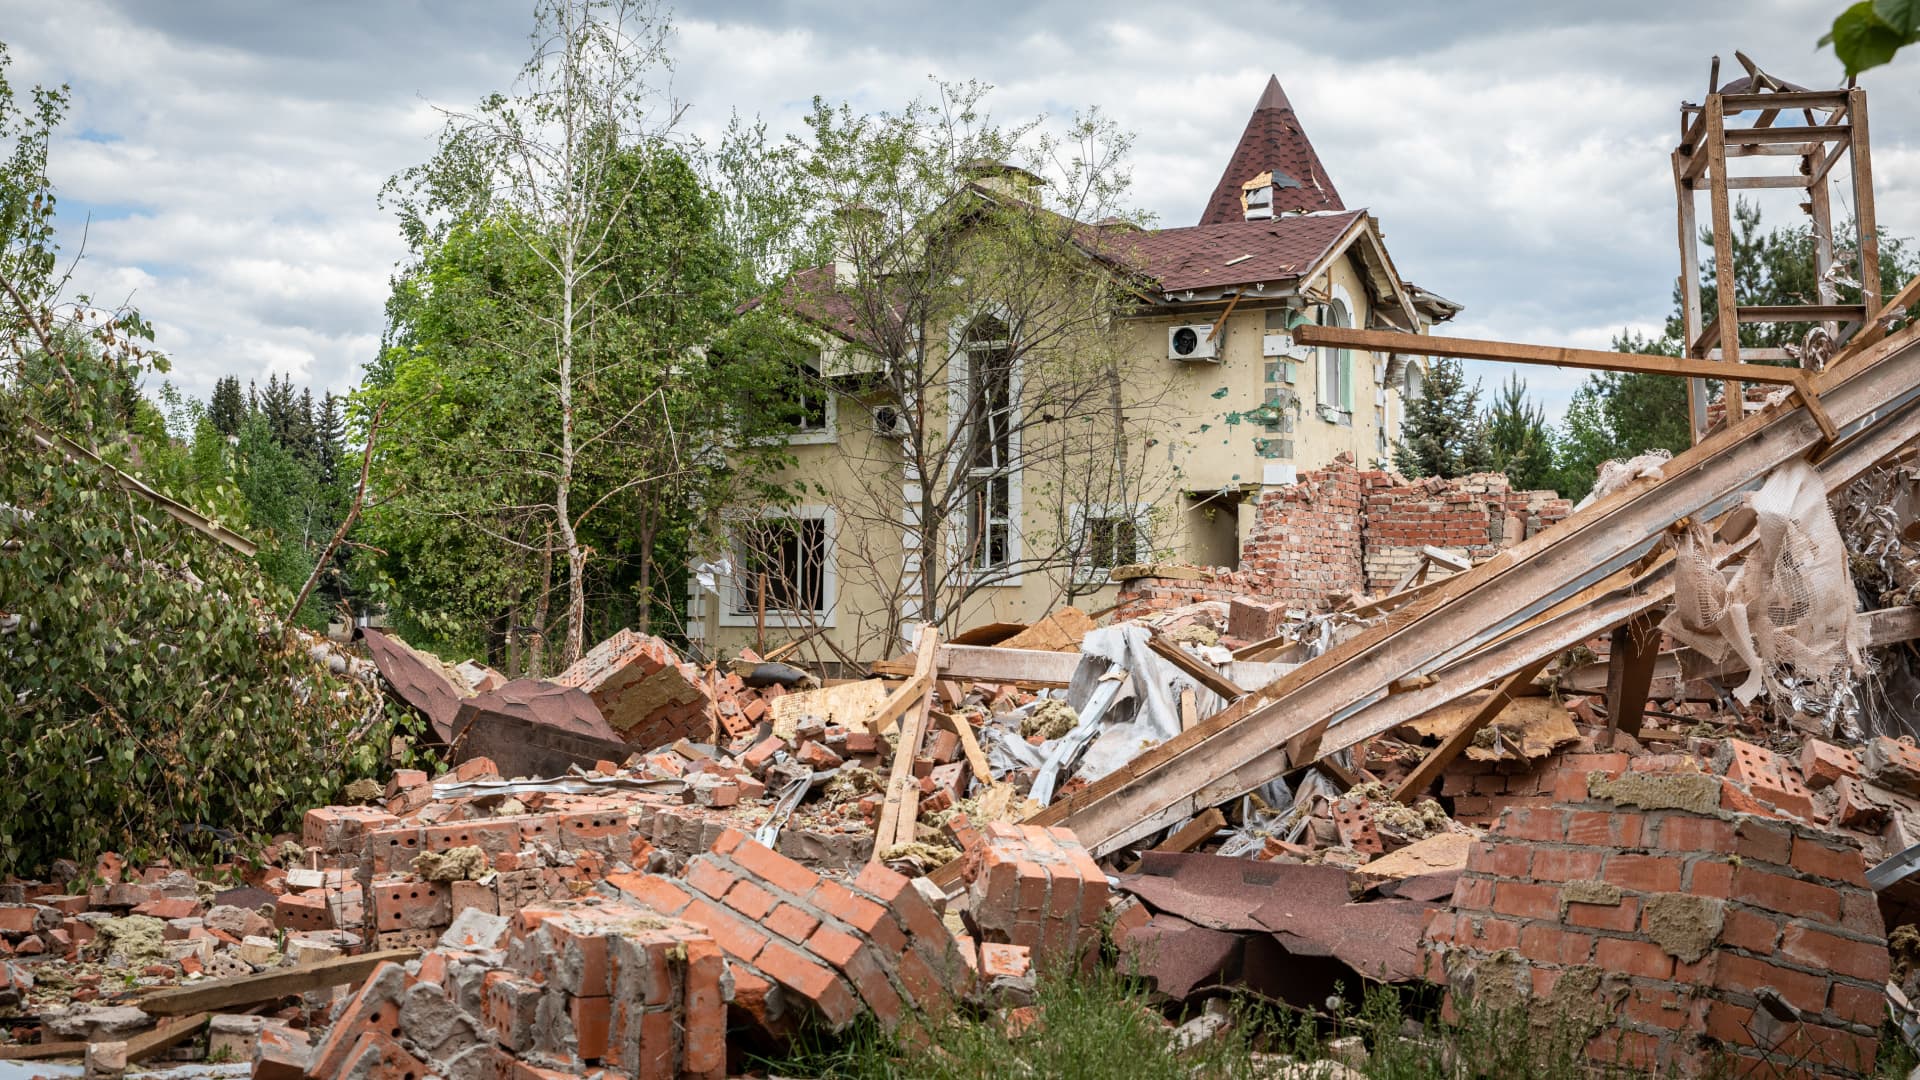 The ruins of a building destroyed by Russian shelling, on the outskirts of the separatist region of Donetsk (Donbas).